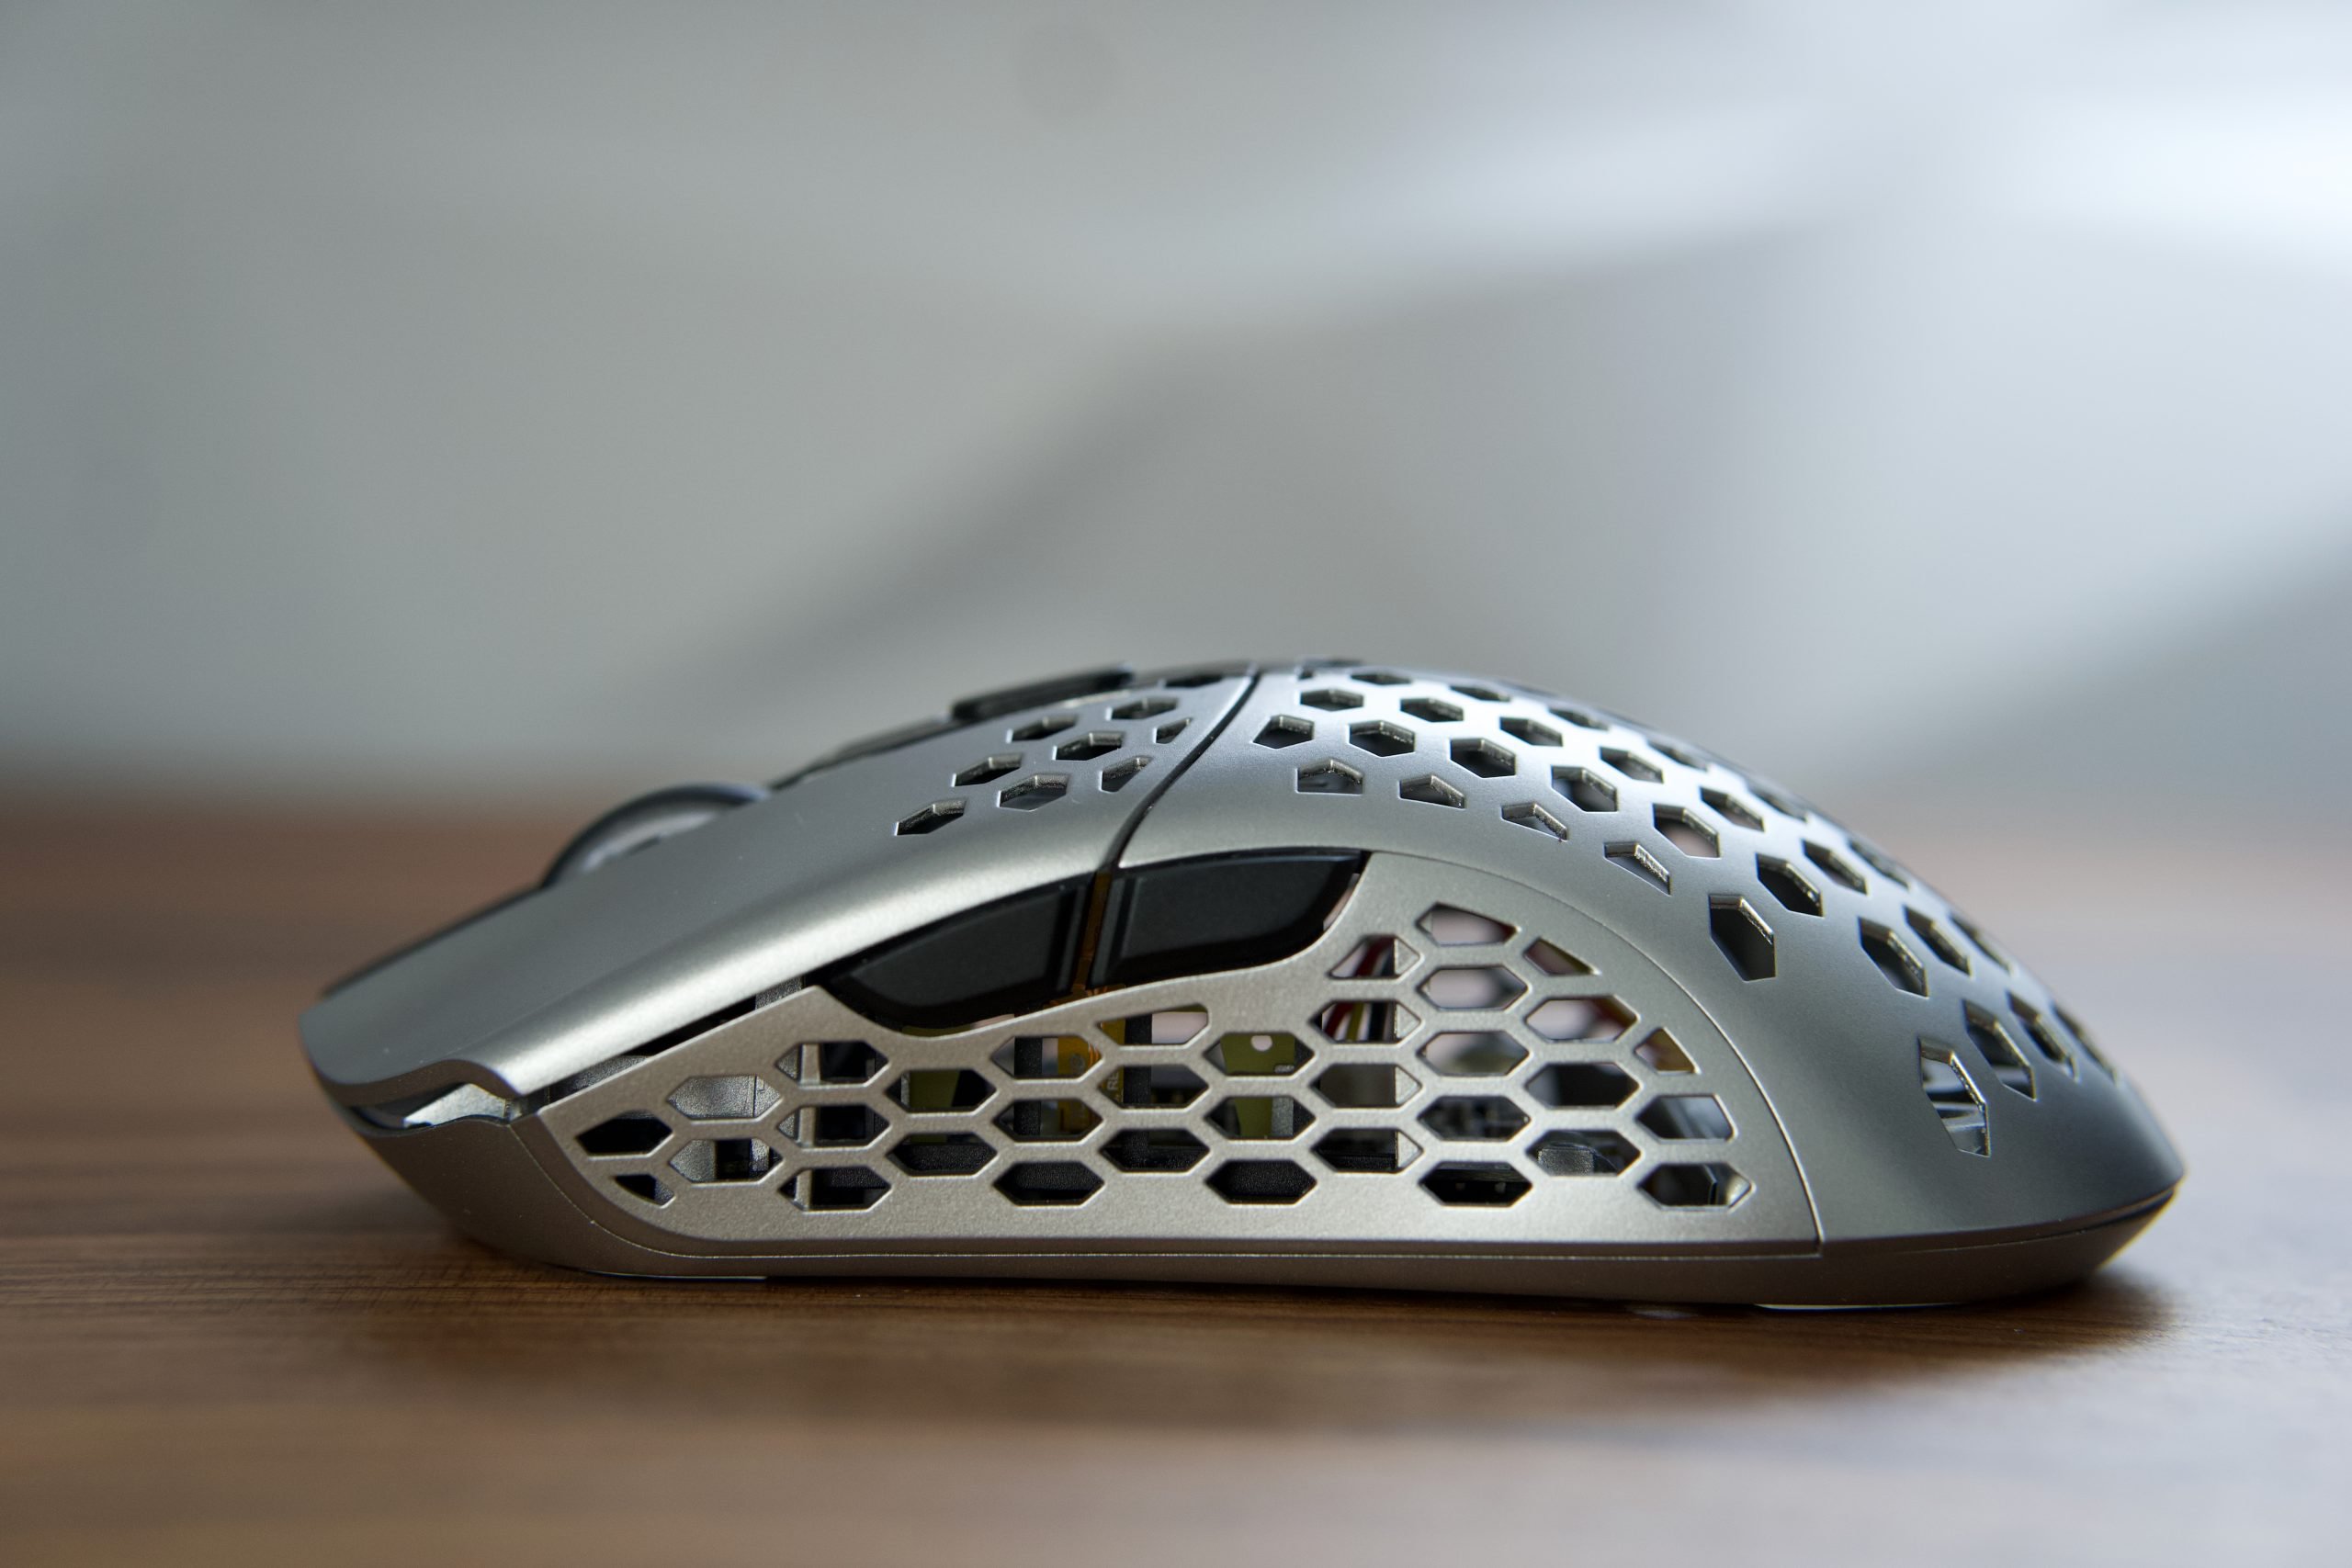 Finalmouse Starlight Pro TenZ Review